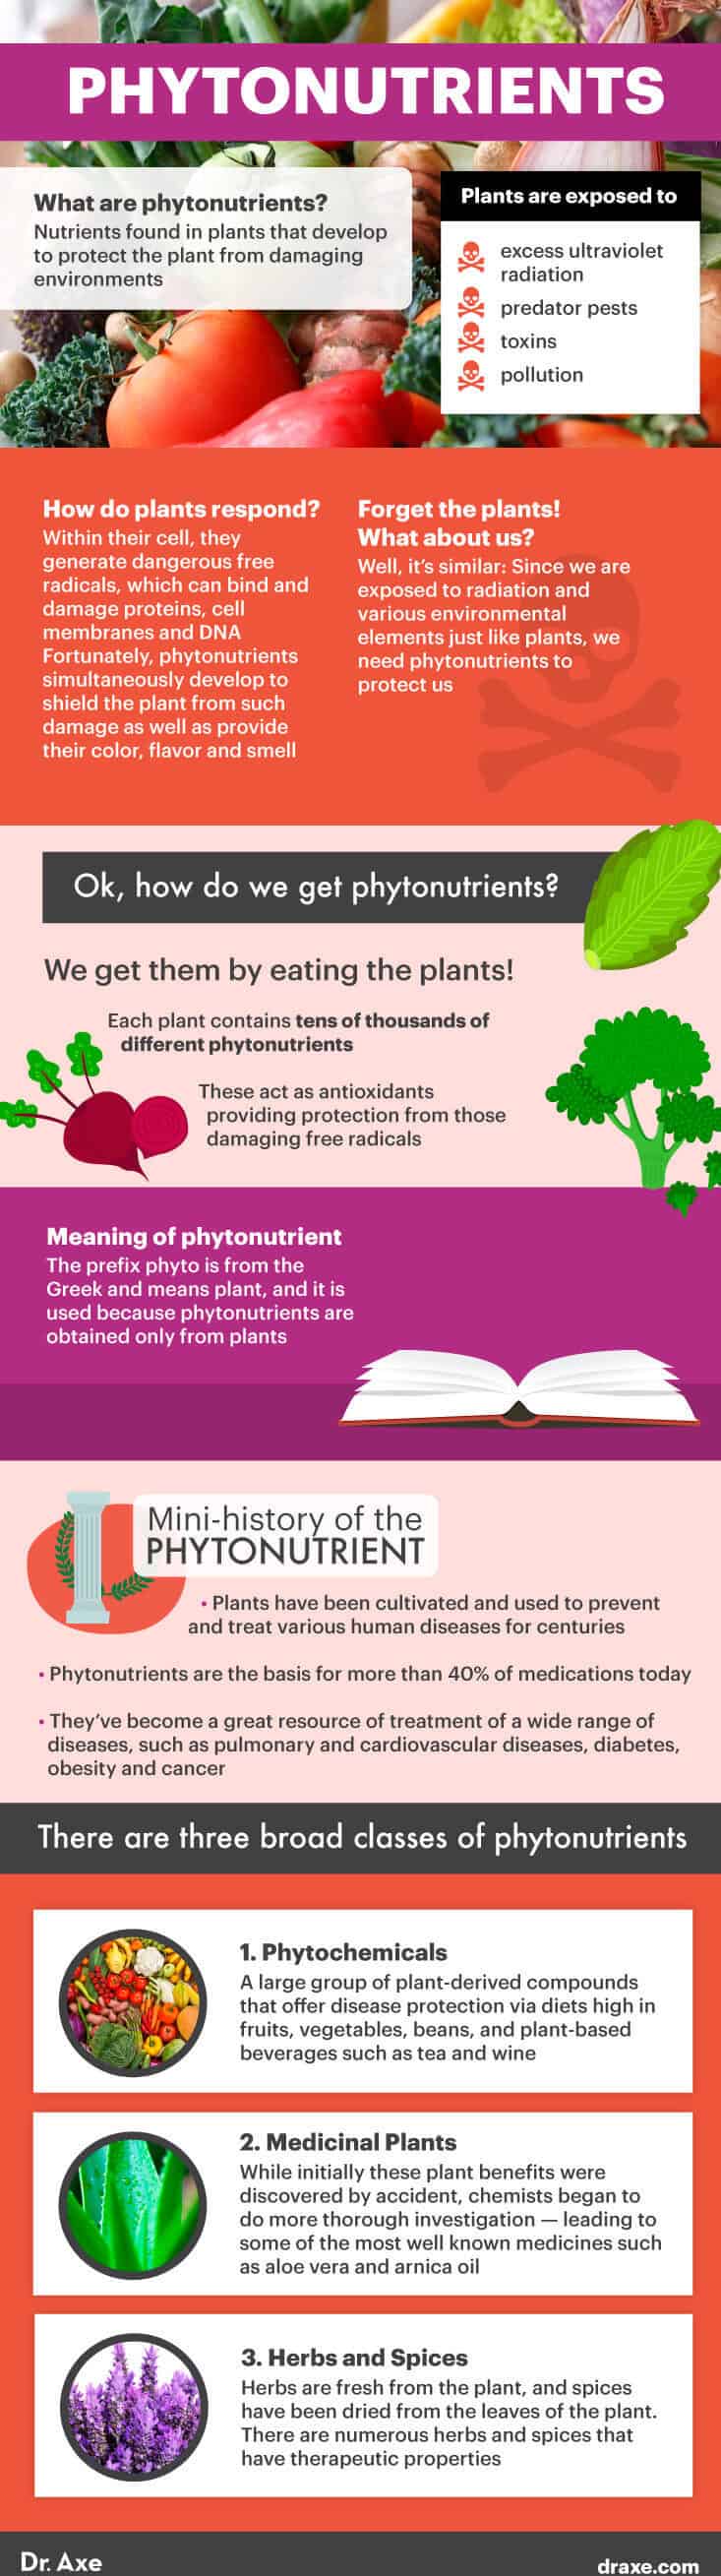 What are phytonutrients? - Dr. Axe